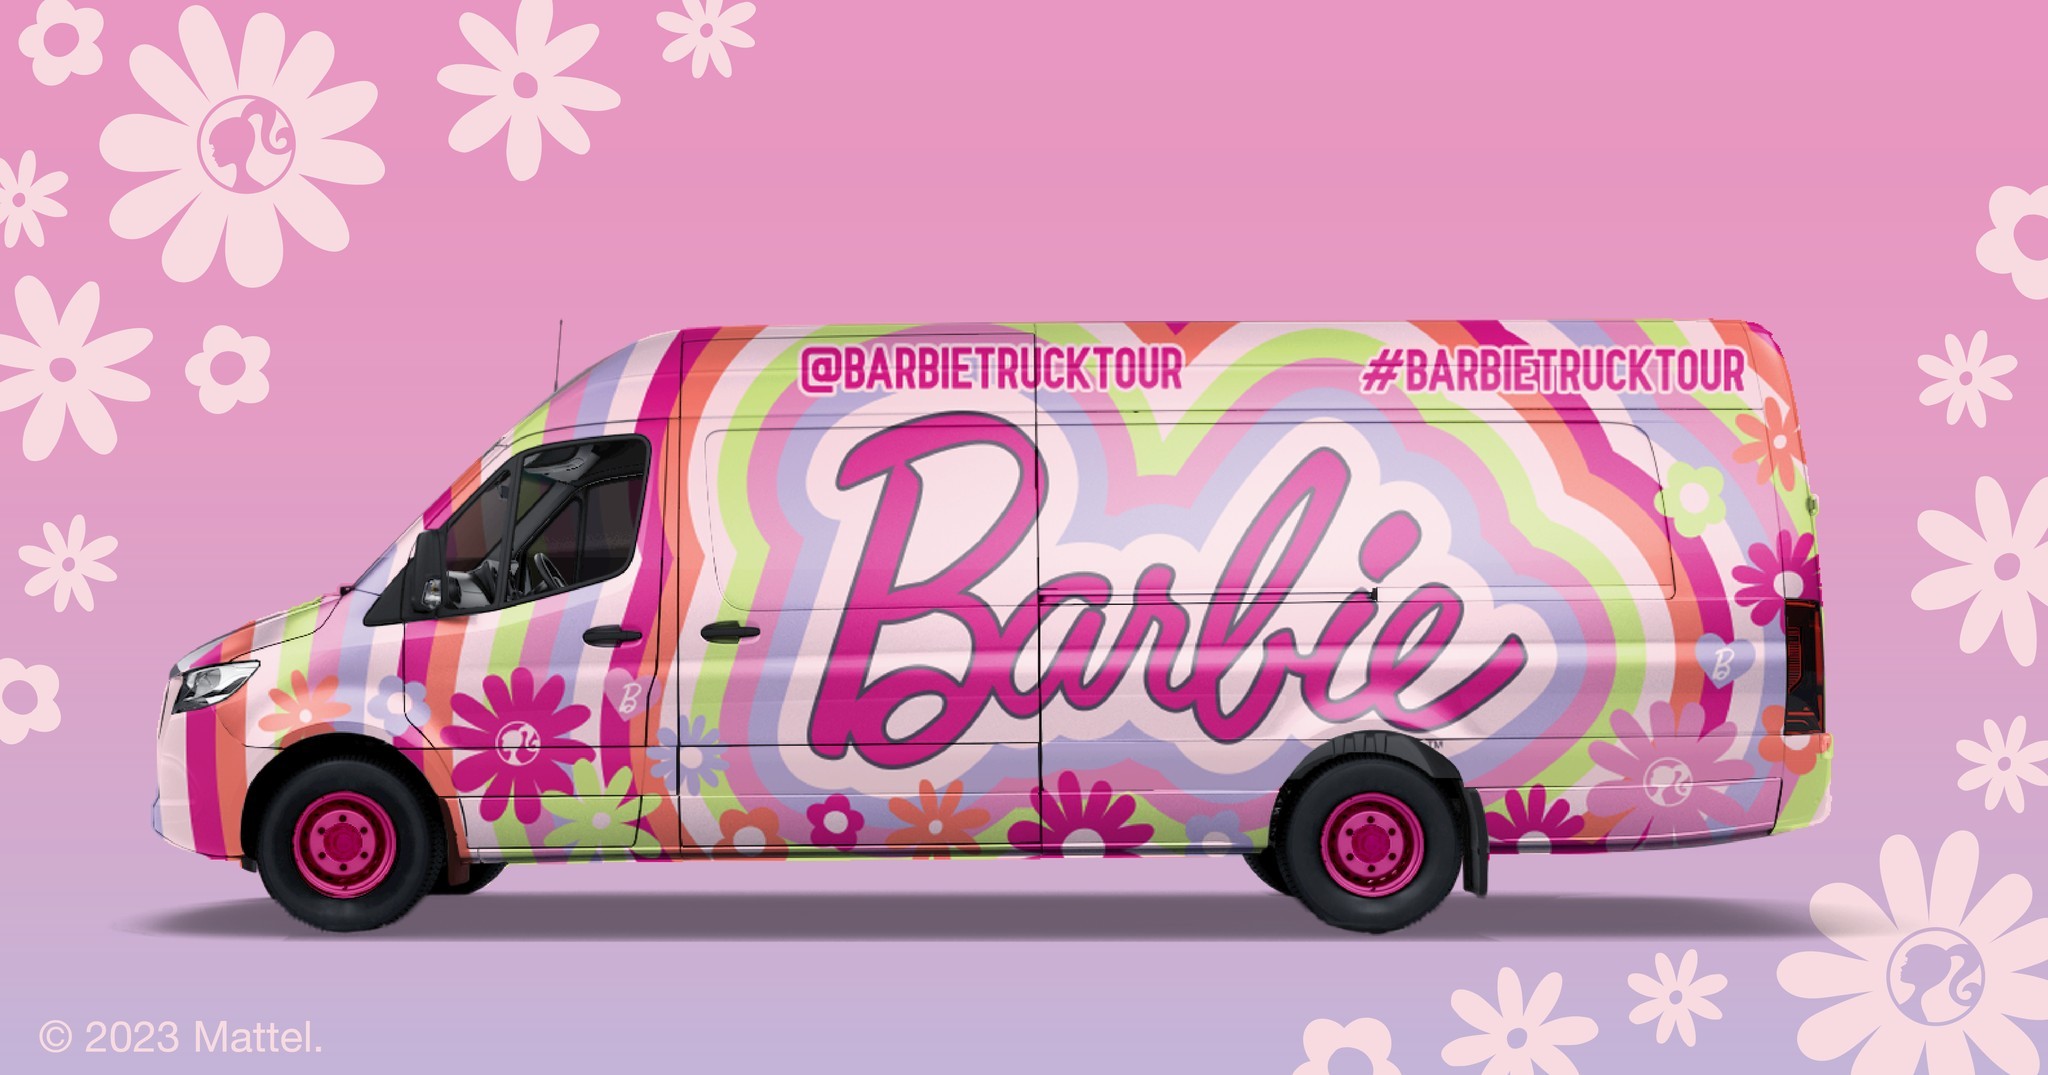 The Barbie Dreamhouse Living Truck Tour will make two stops in Phoenix